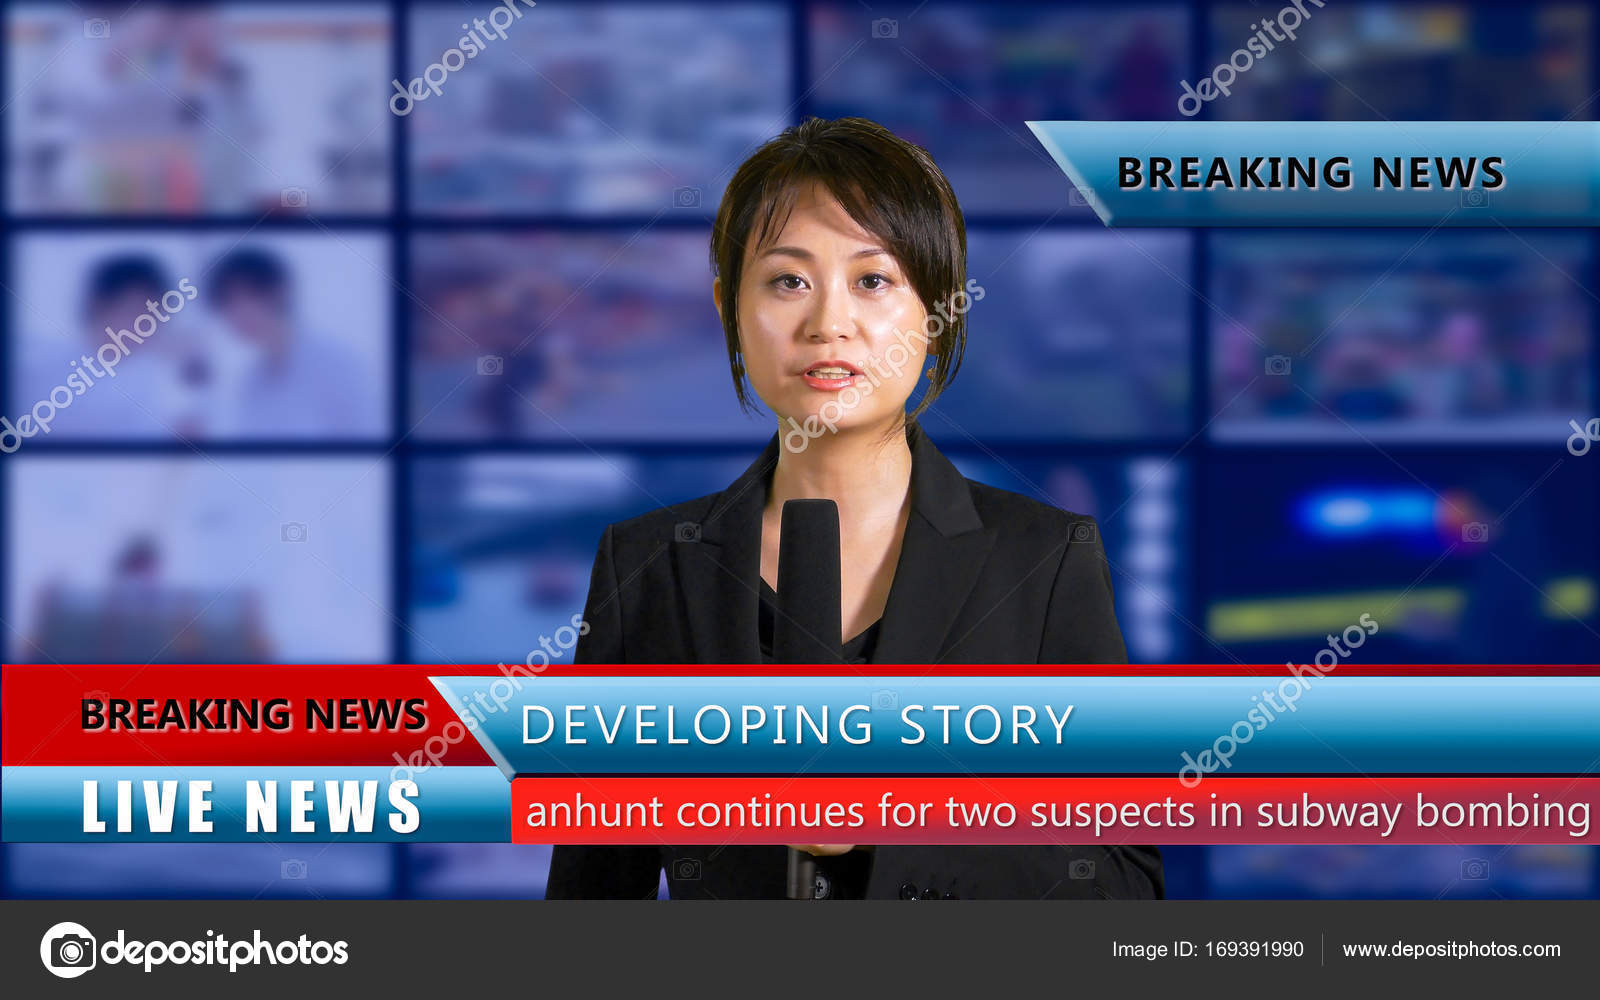 Female news anchor in studio Stock Photo by ©imagesbykenny 169391990